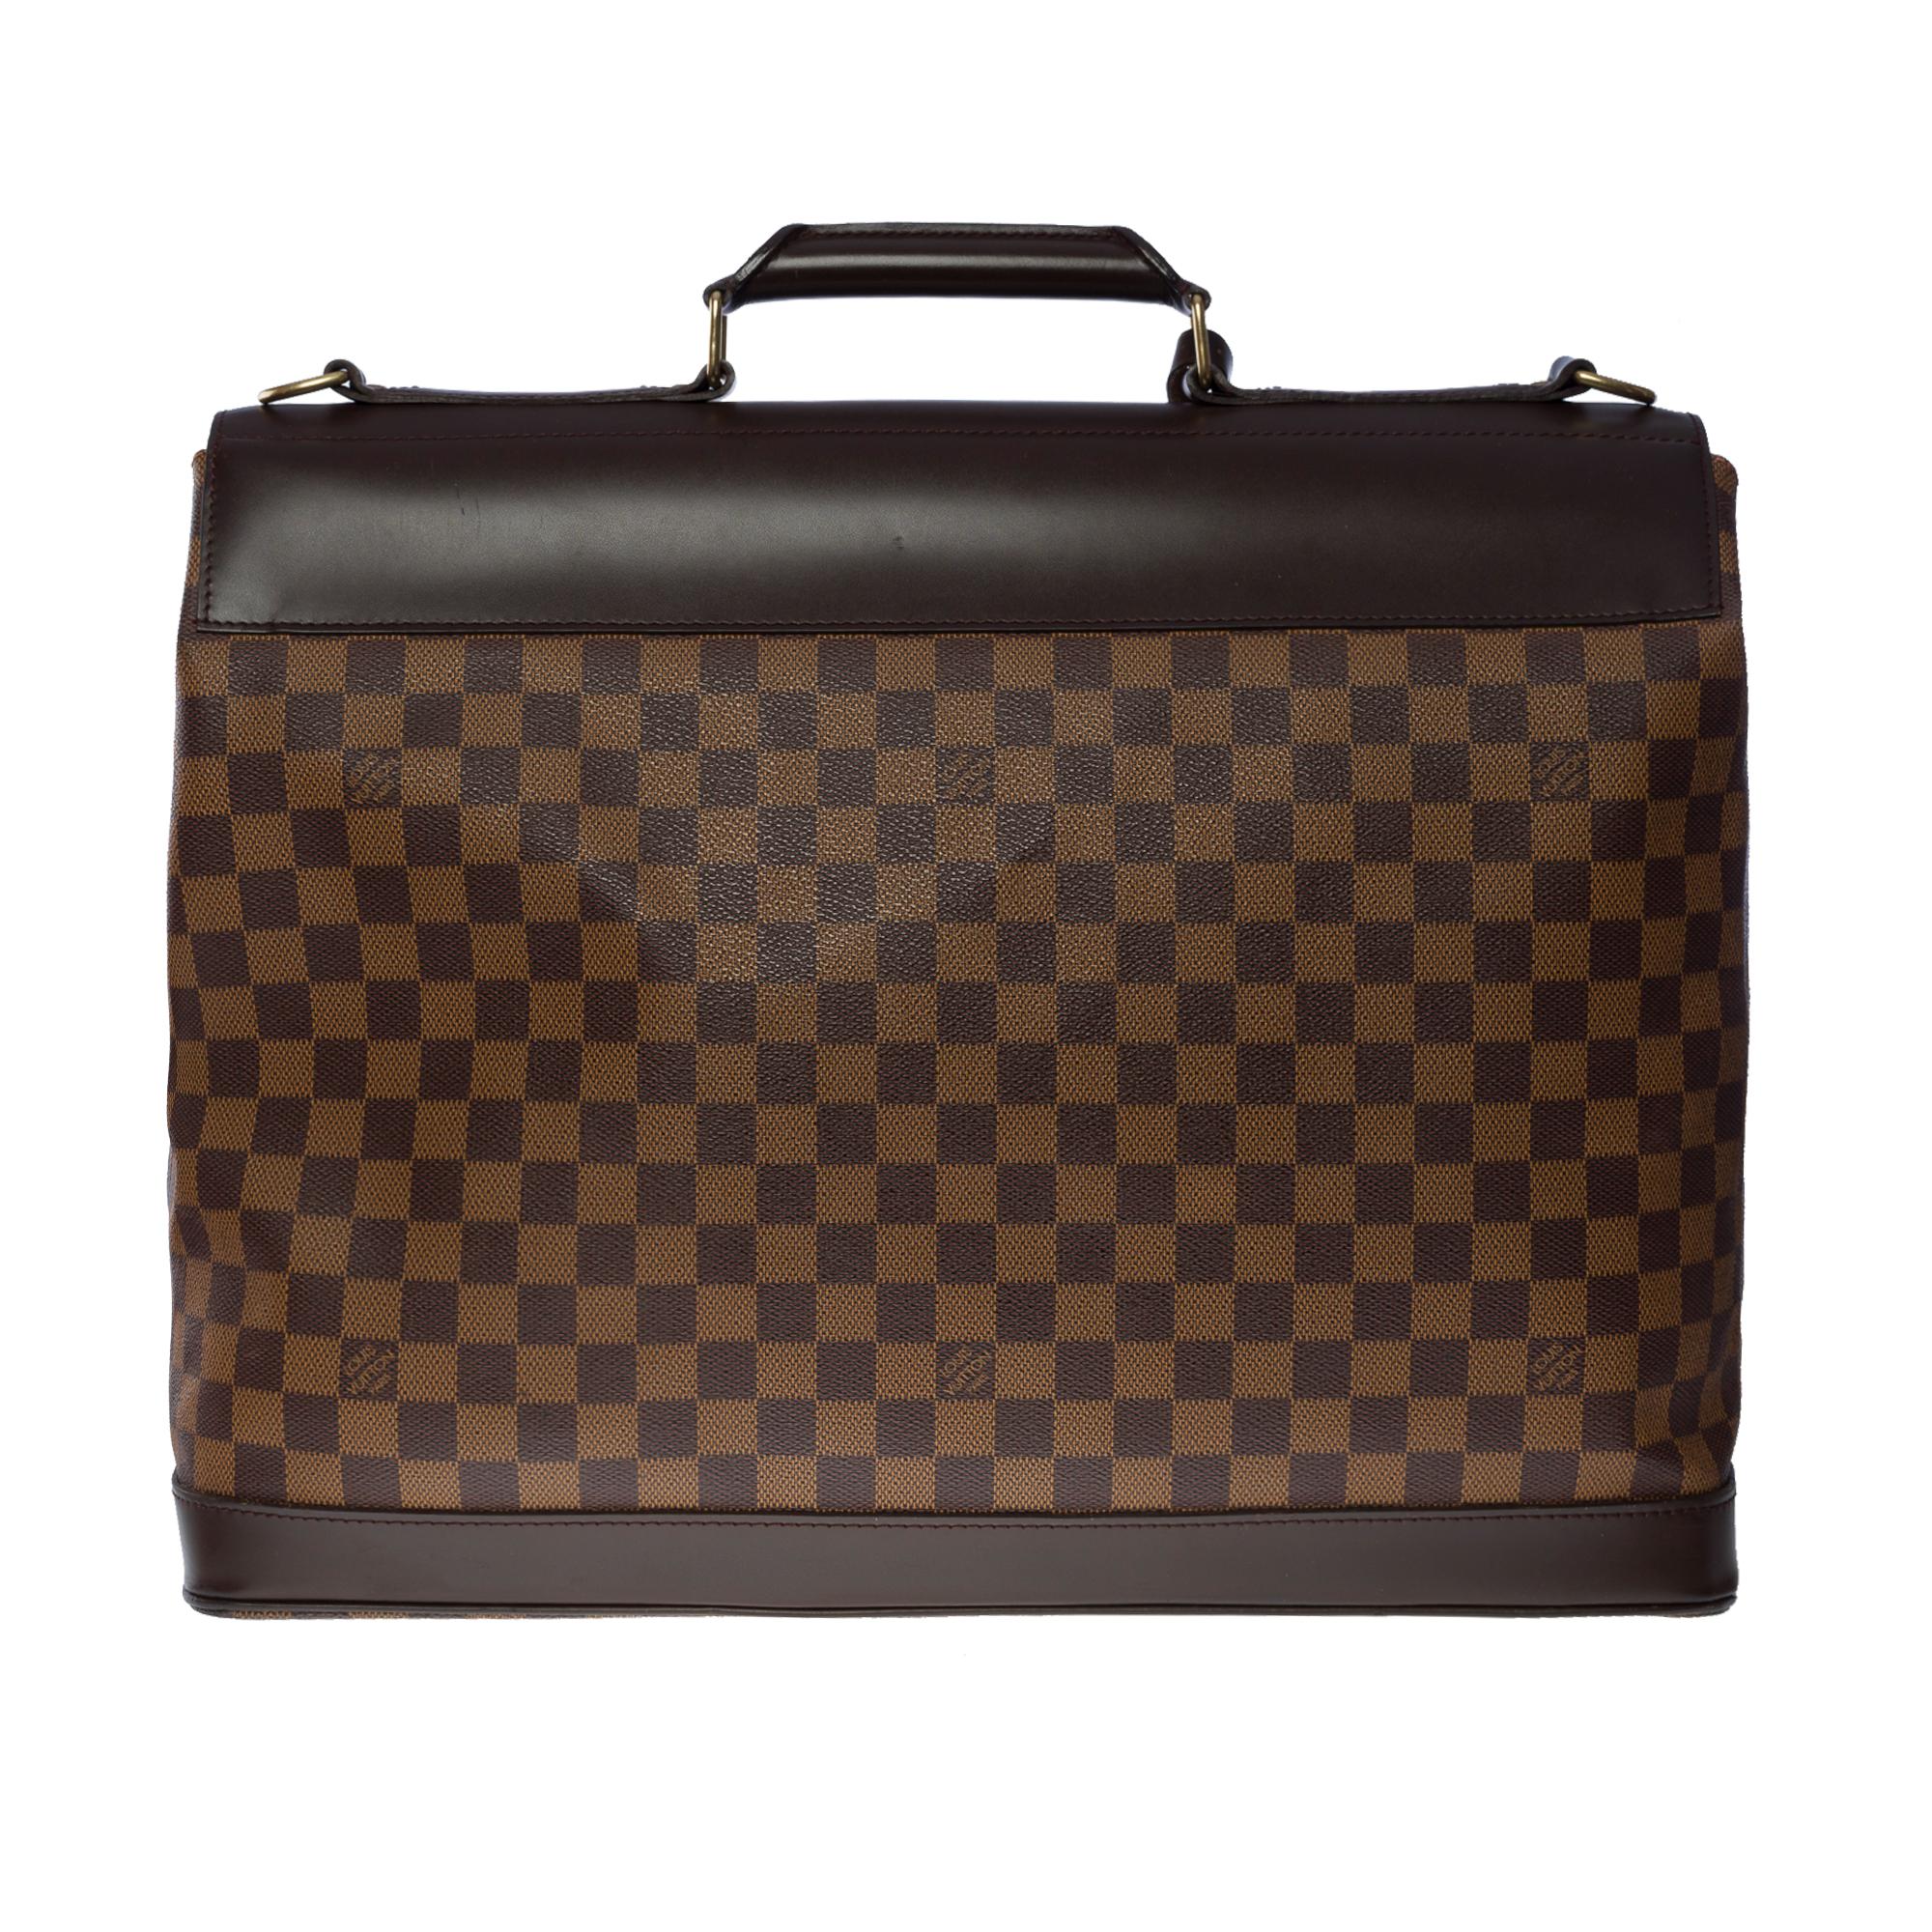 Elegant Louis Vuitton Clipper West-End travel bag in ebony checkered canvas and brown leather, gold-tone metal hardware, brown leather handle, removable brown leather shoulder strap for hand or shoulder support

One closure per flap
Inner lining in